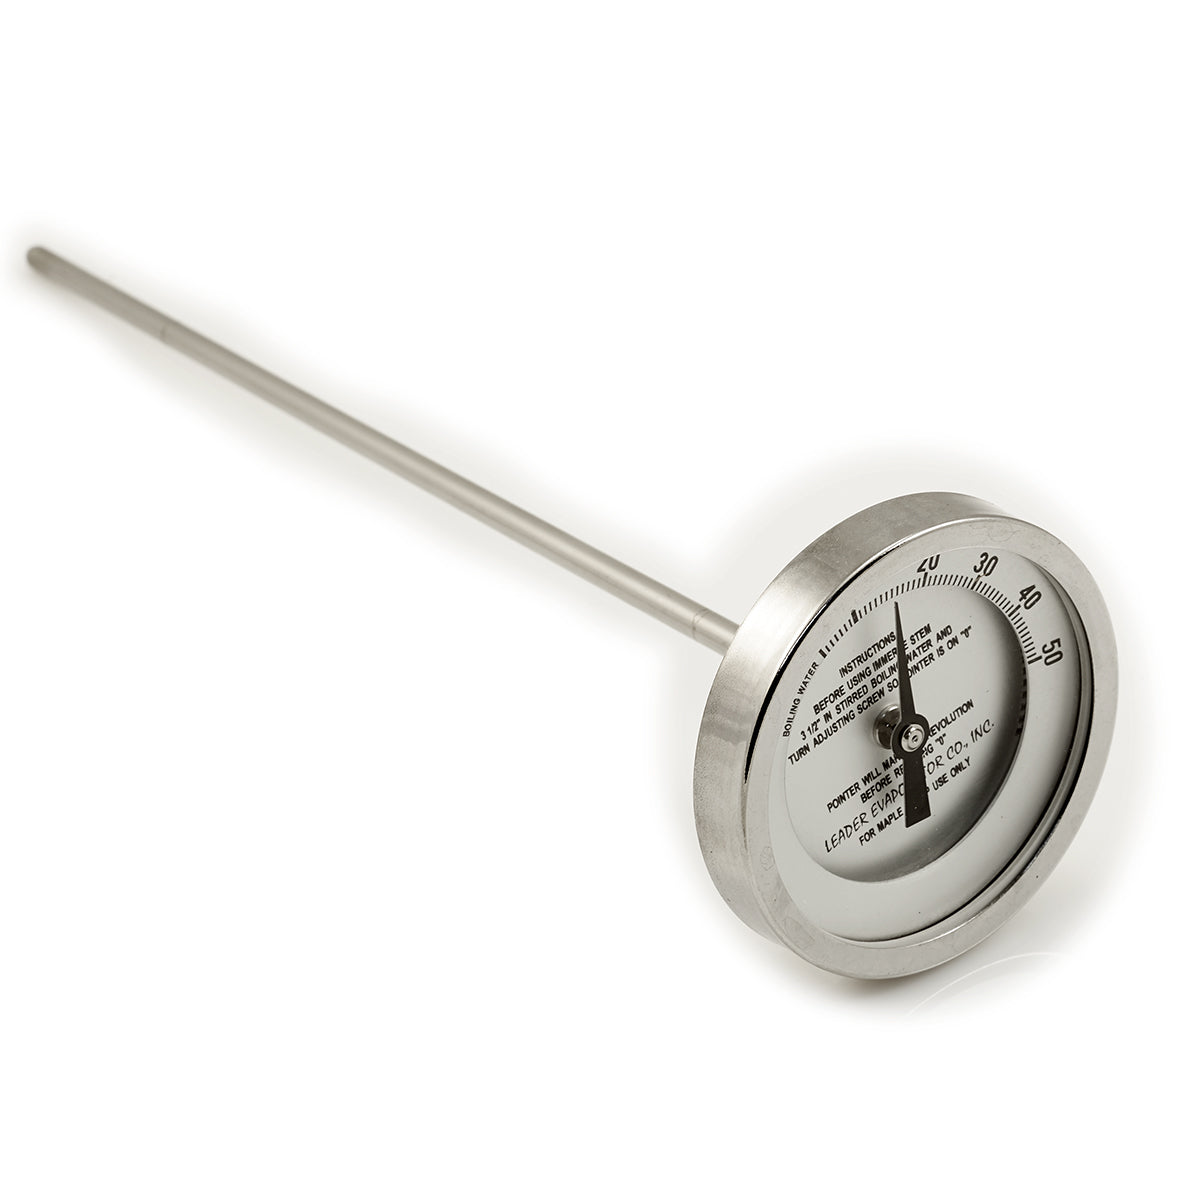 Kegco Dial Thermometer for Brew Pots - 2 Dial, 12 Stem